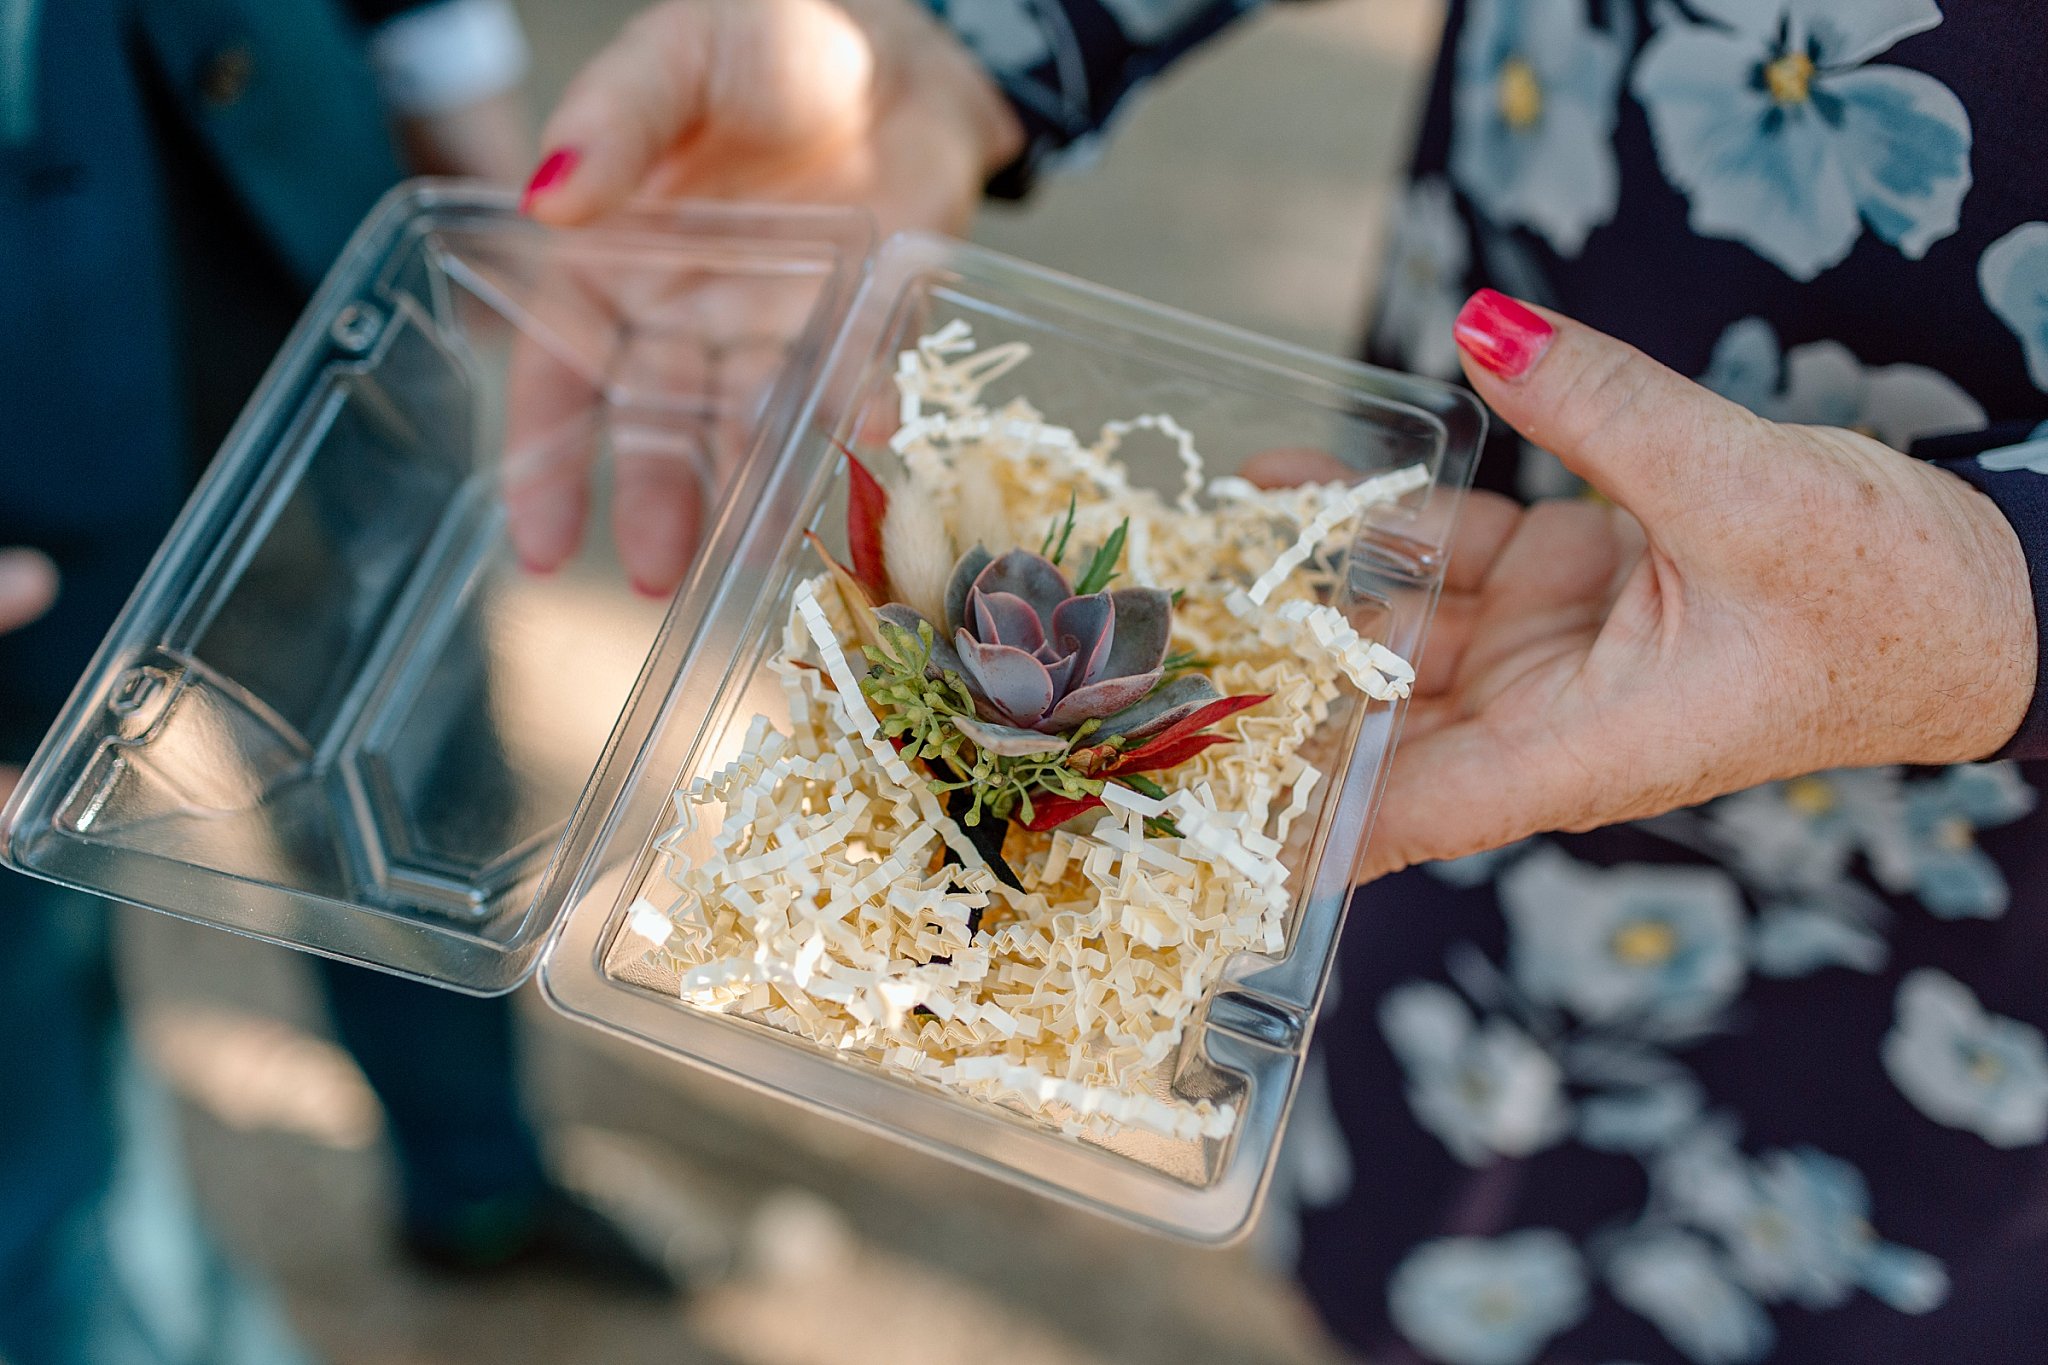  boutonniere displayed in box at Tucson botanical gardens ceremony  